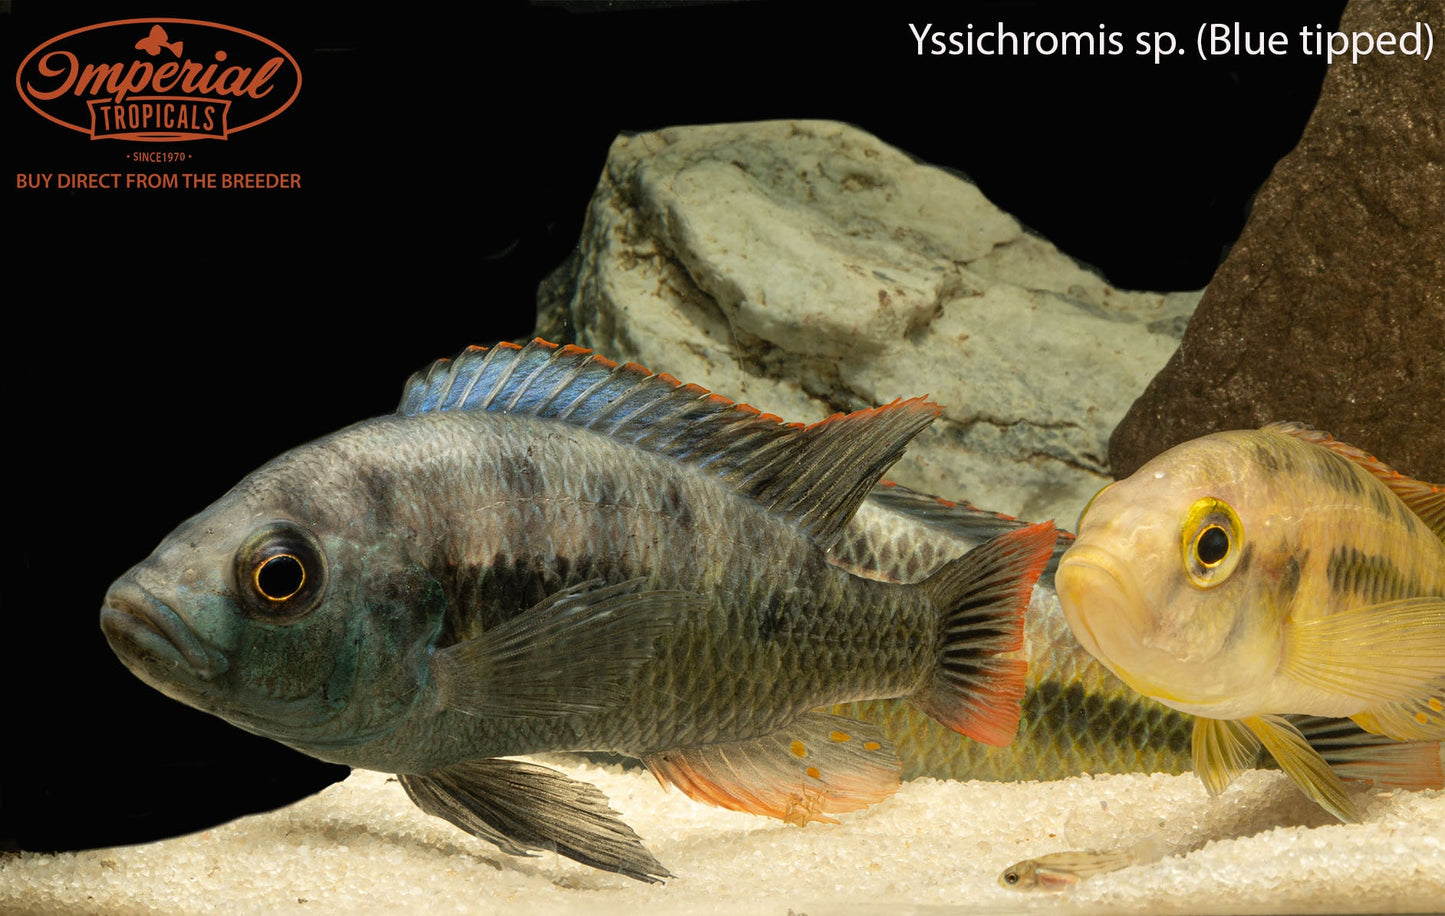 Yssichromis sp. ‘blue tipped’